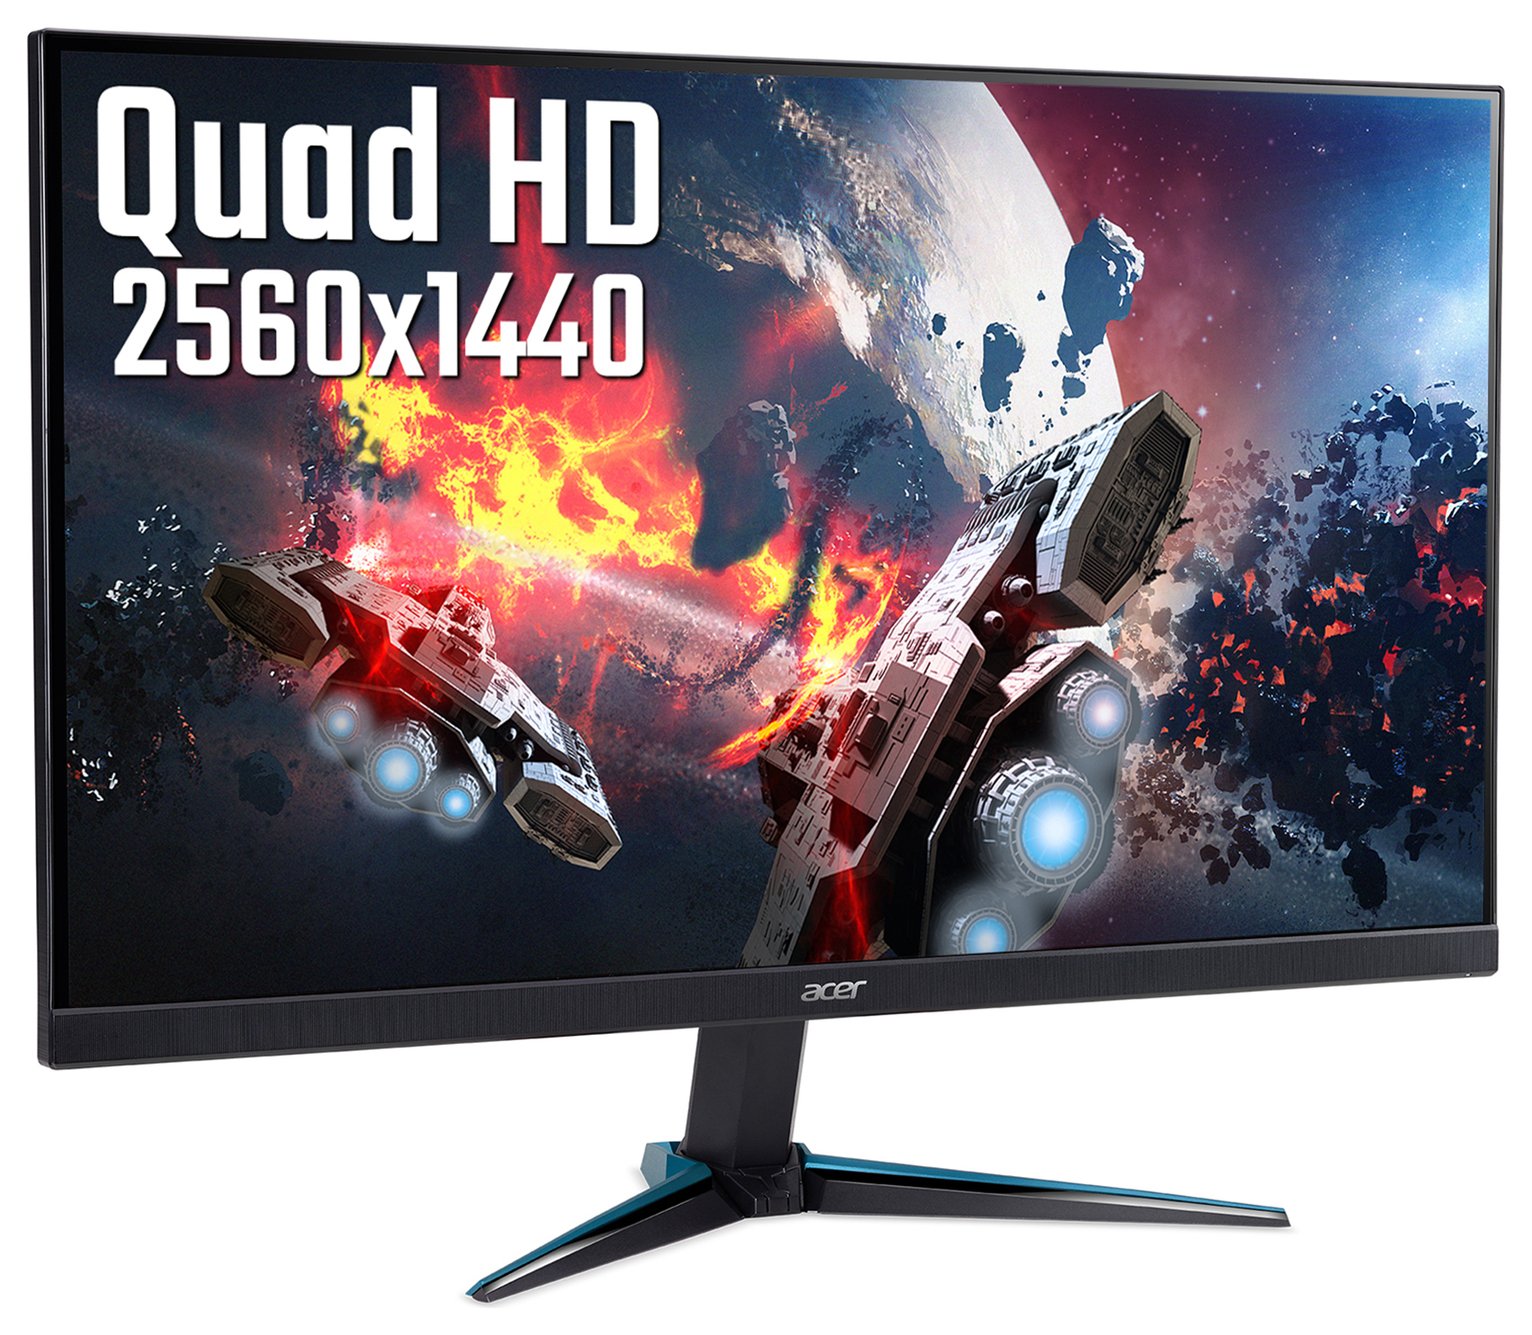 Acer Nitro VG270U 27in 75Hz IPS WQHD Gaming Monitor Review